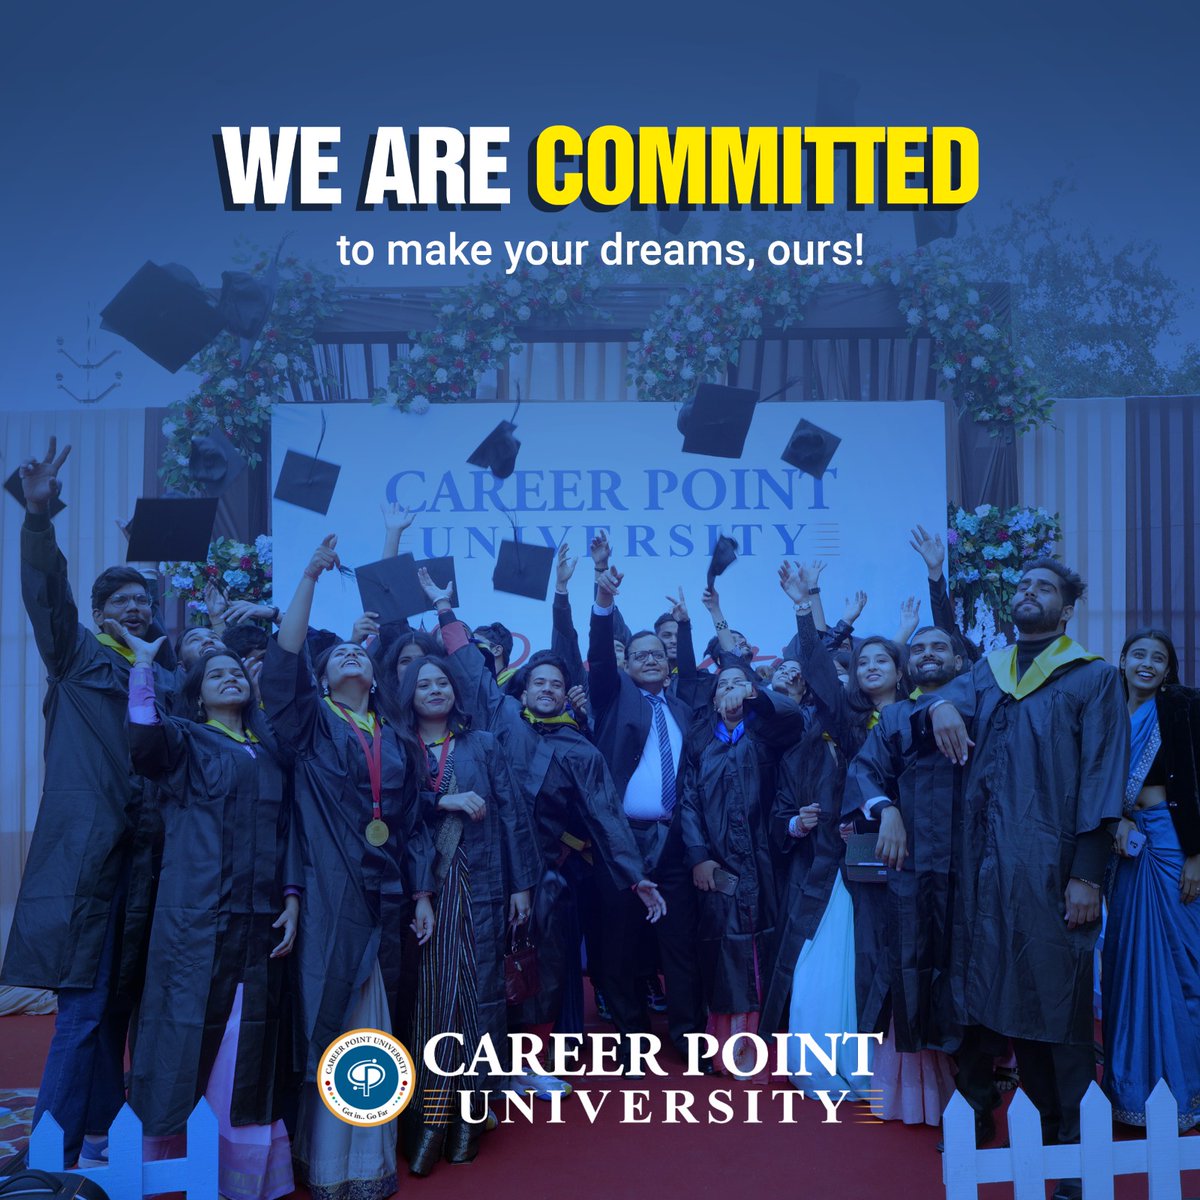 Join CPU on a journey where your dreams become our driving force. Together, we're committed to turning aspirations into achievements, making every dream of yours a shared triumph.

#CareerPointUniversity #CPU #CPUKota
#DreamTogether #AchieveTogether #topuniversities